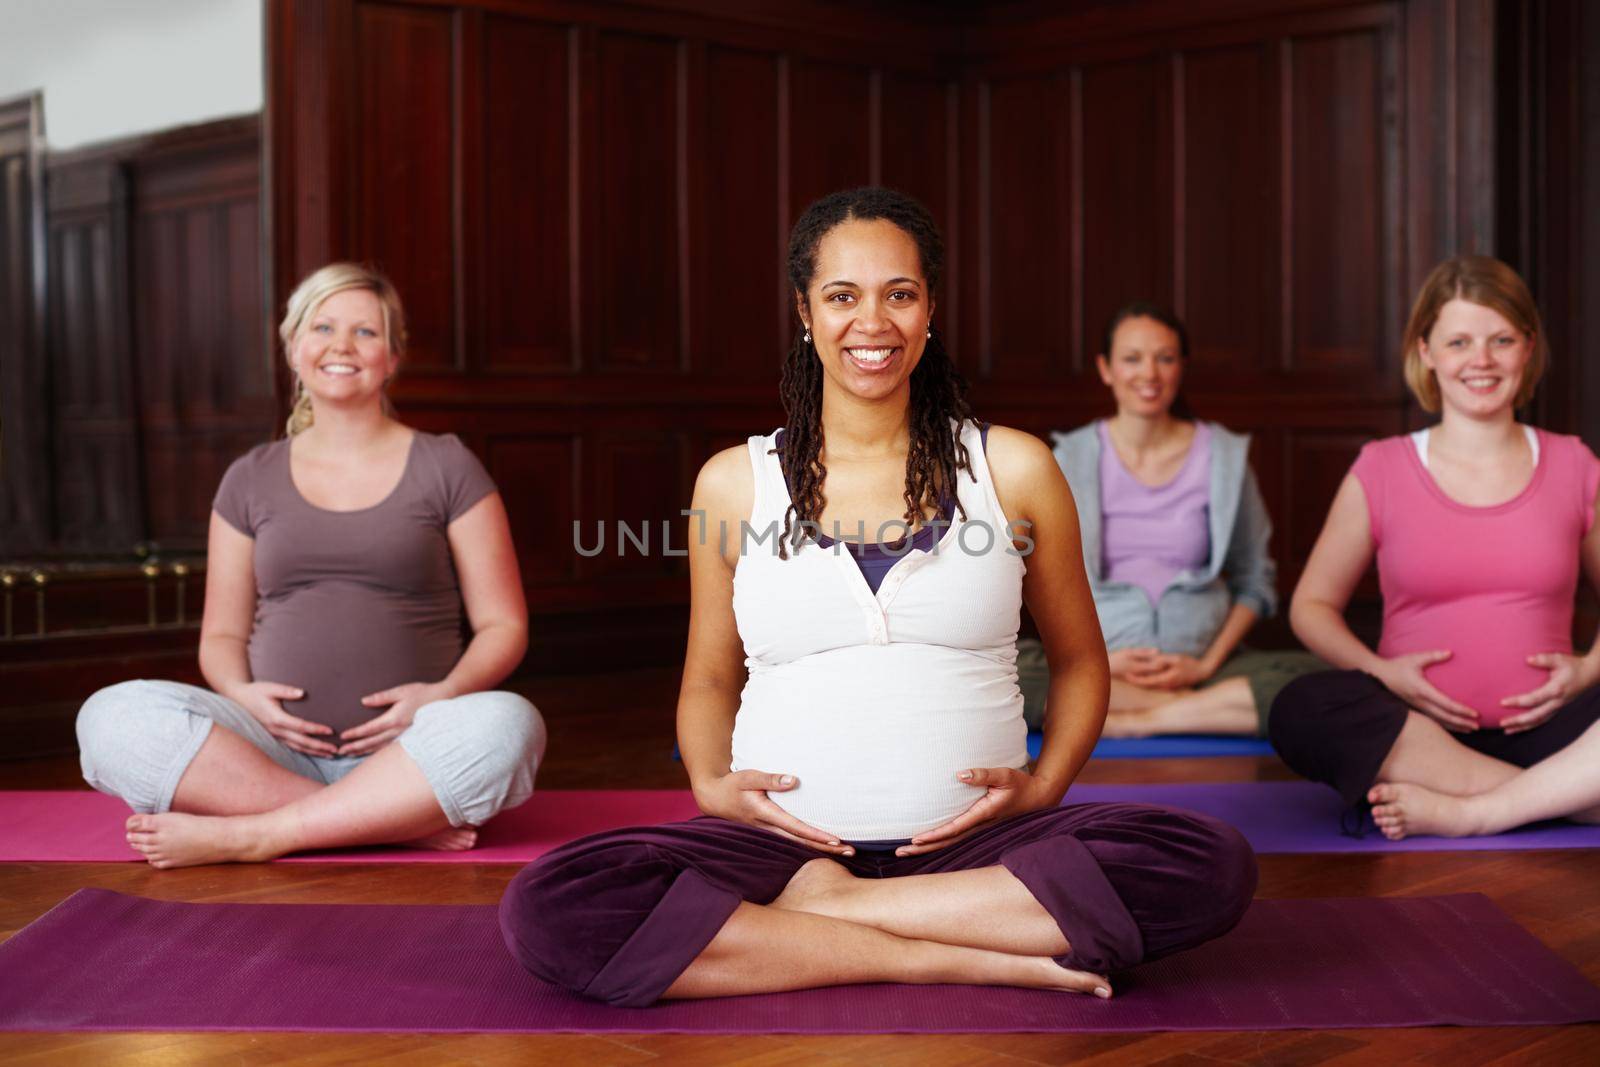 Portrait of happy pregnant women in yoga with leader or teacher teaching in training or class for fitness and meditation. Pilates exercise or workout with group for pregnancy wellness and health body.